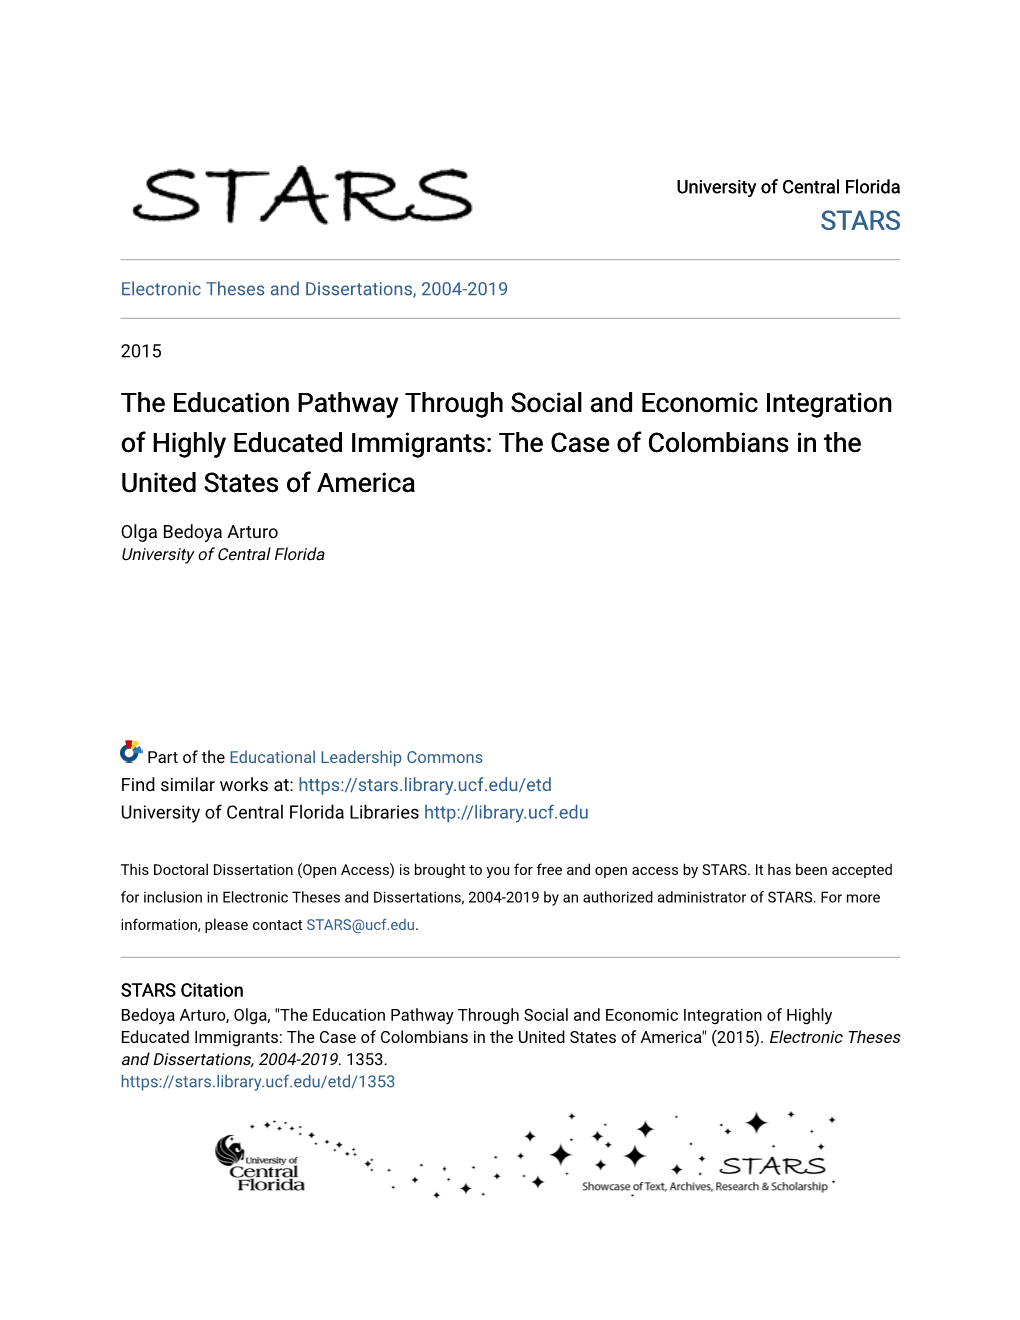 The Education Pathway Through Social and Economic Integration of Highly Educated Immigrants: the Case of Colombians in the United States of America